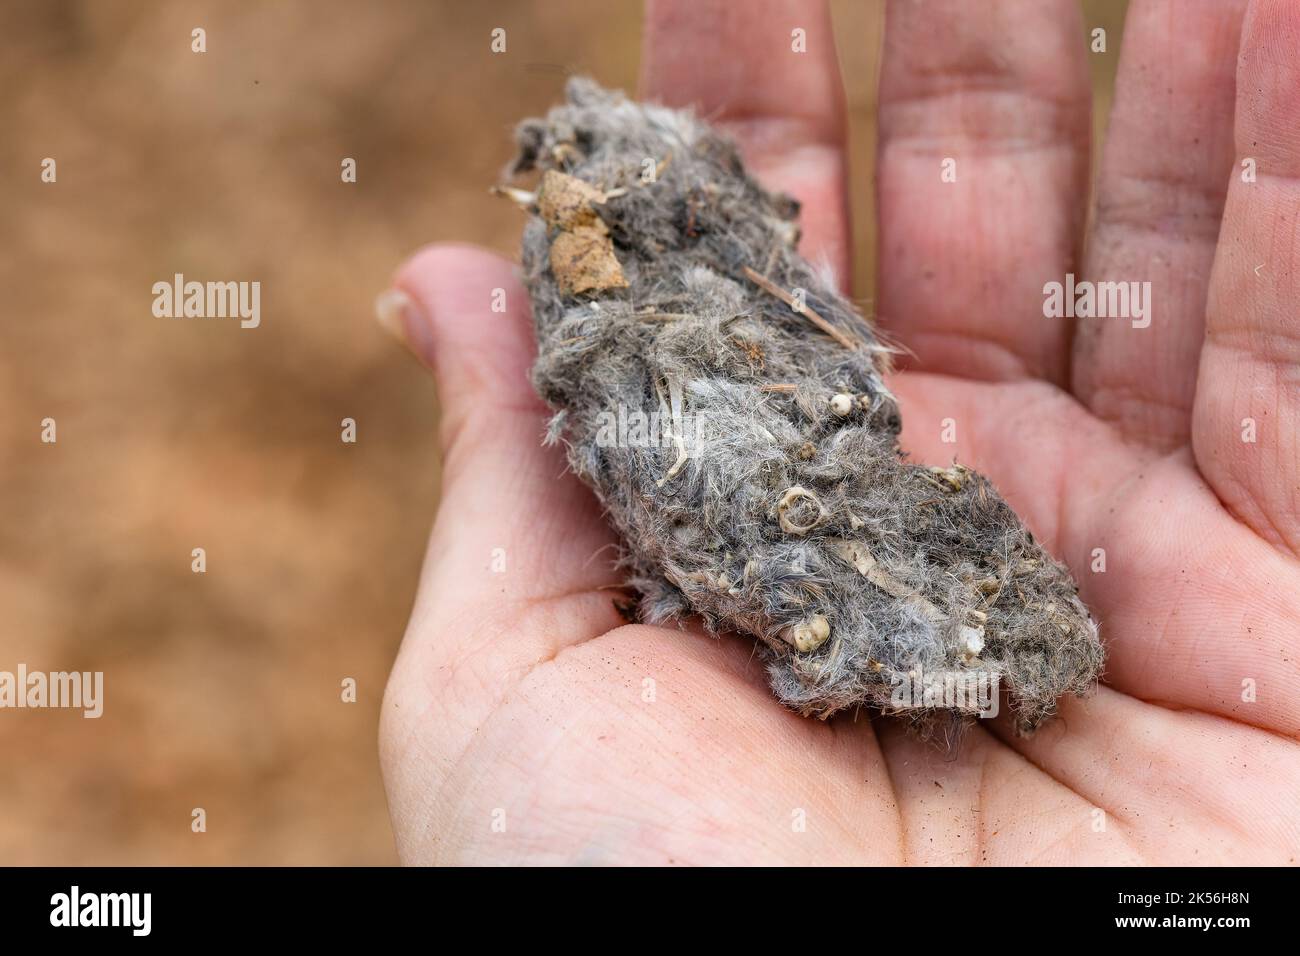 A dirty palm holding an owl pellet consisting of grey animal fur and little bones. Blurry brown background. Stock Photo